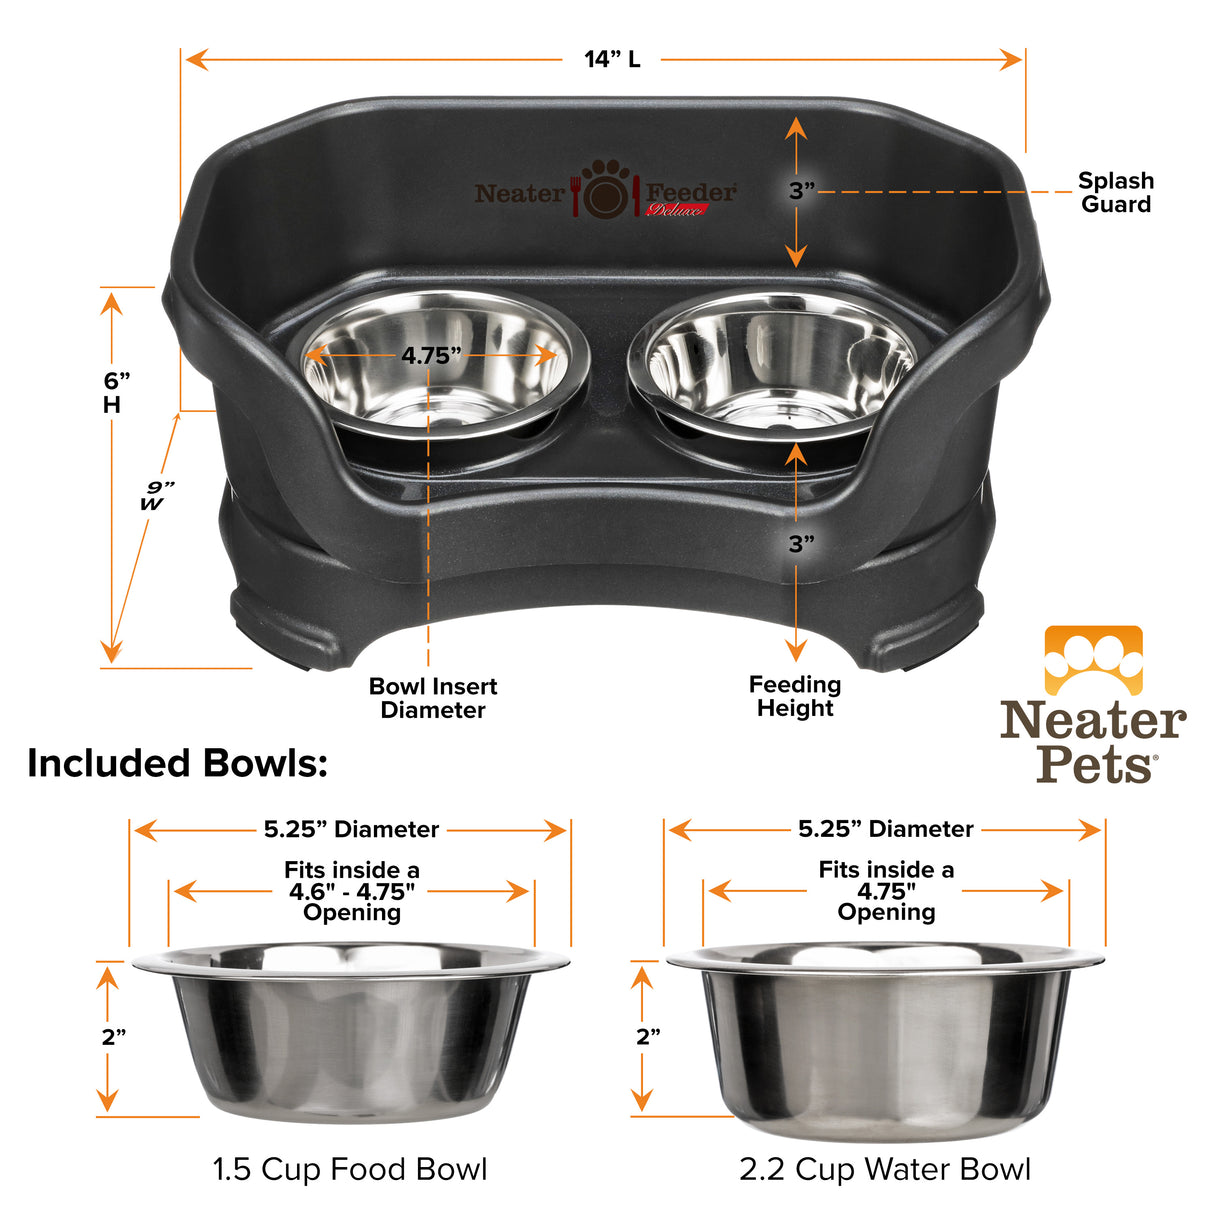 Deluxe Midnight Black Small Dog Neater Feeder and Bowl dimensions